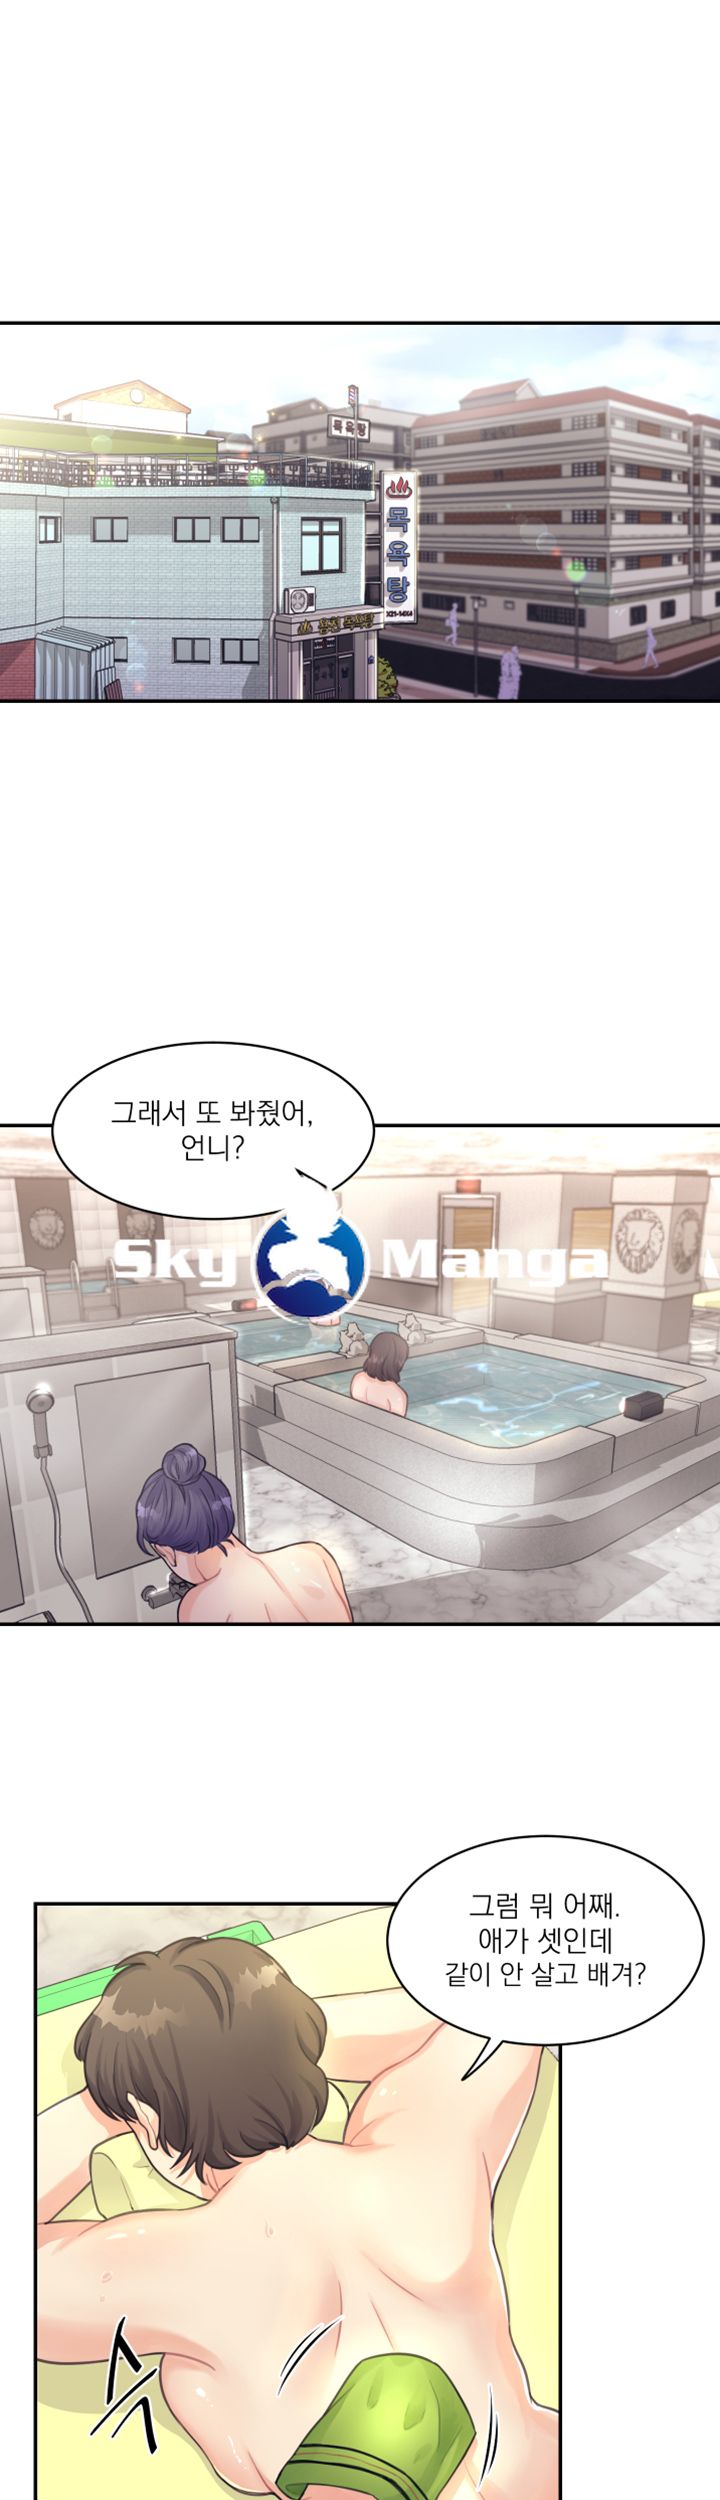 Public Bathhouse Raw - Chapter 1 Page 1